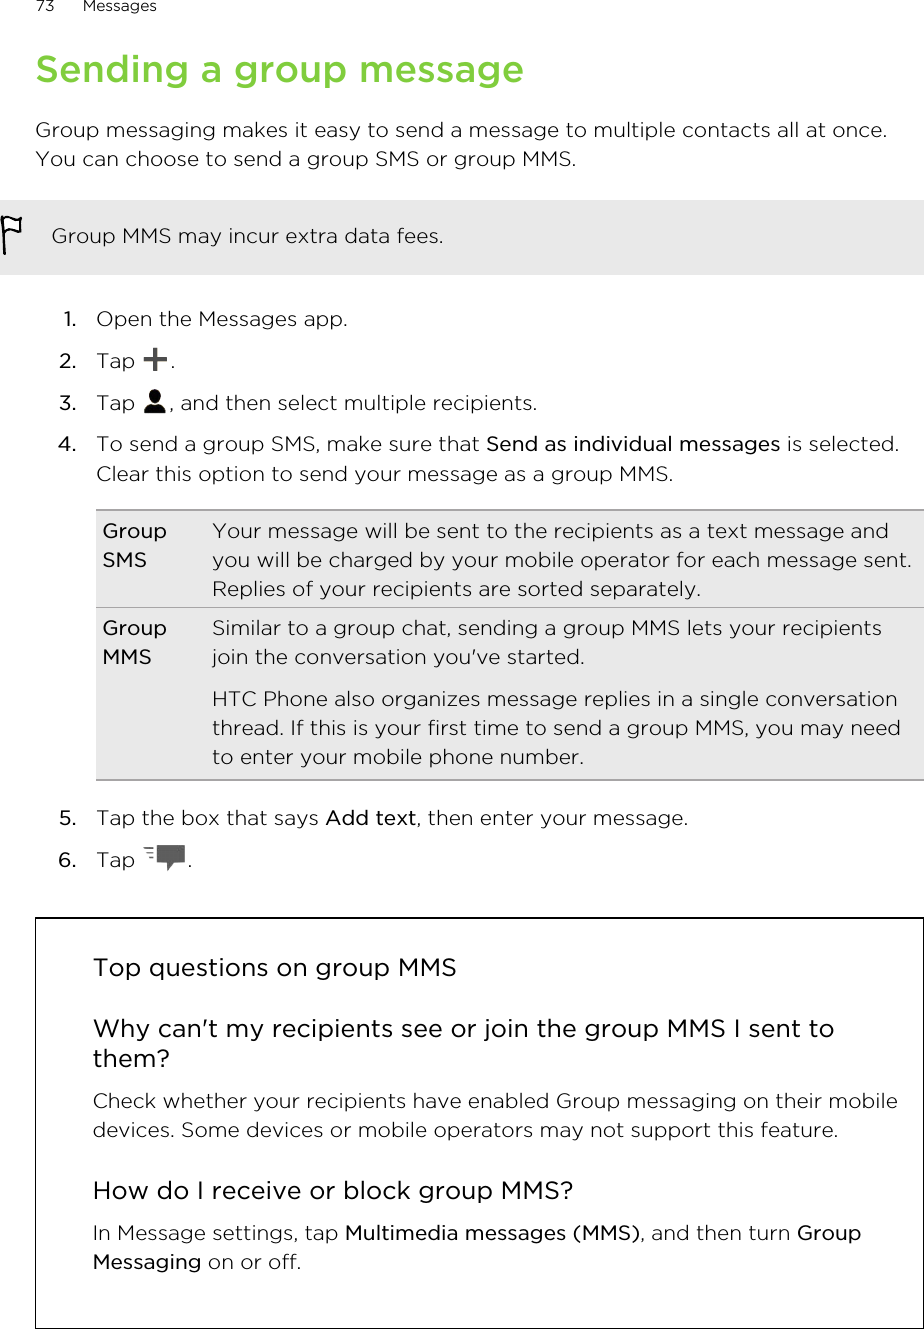 Sending a group messageGroup messaging makes it easy to send a message to multiple contacts all at once.You can choose to send a group SMS or group MMS.Group MMS may incur extra data fees.1. Open the Messages app.2. Tap  .3. Tap  , and then select multiple recipients.4. To send a group SMS, make sure that Send as individual messages is selected.Clear this option to send your message as a group MMS.GroupSMSYour message will be sent to the recipients as a text message andyou will be charged by your mobile operator for each message sent.Replies of your recipients are sorted separately.GroupMMSSimilar to a group chat, sending a group MMS lets your recipientsjoin the conversation you&apos;ve started.HTC Phone also organizes message replies in a single conversationthread. If this is your first time to send a group MMS, you may needto enter your mobile phone number.5. Tap the box that says Add text, then enter your message.6. Tap  .Top questions on group MMSWhy can&apos;t my recipients see or join the group MMS I sent tothem?Check whether your recipients have enabled Group messaging on their mobiledevices. Some devices or mobile operators may not support this feature.How do I receive or block group MMS?In Message settings, tap Multimedia messages (MMS), and then turn GroupMessaging on or off.73 MessagesHTC Confidential for Certification HTC Confidential for Certification 